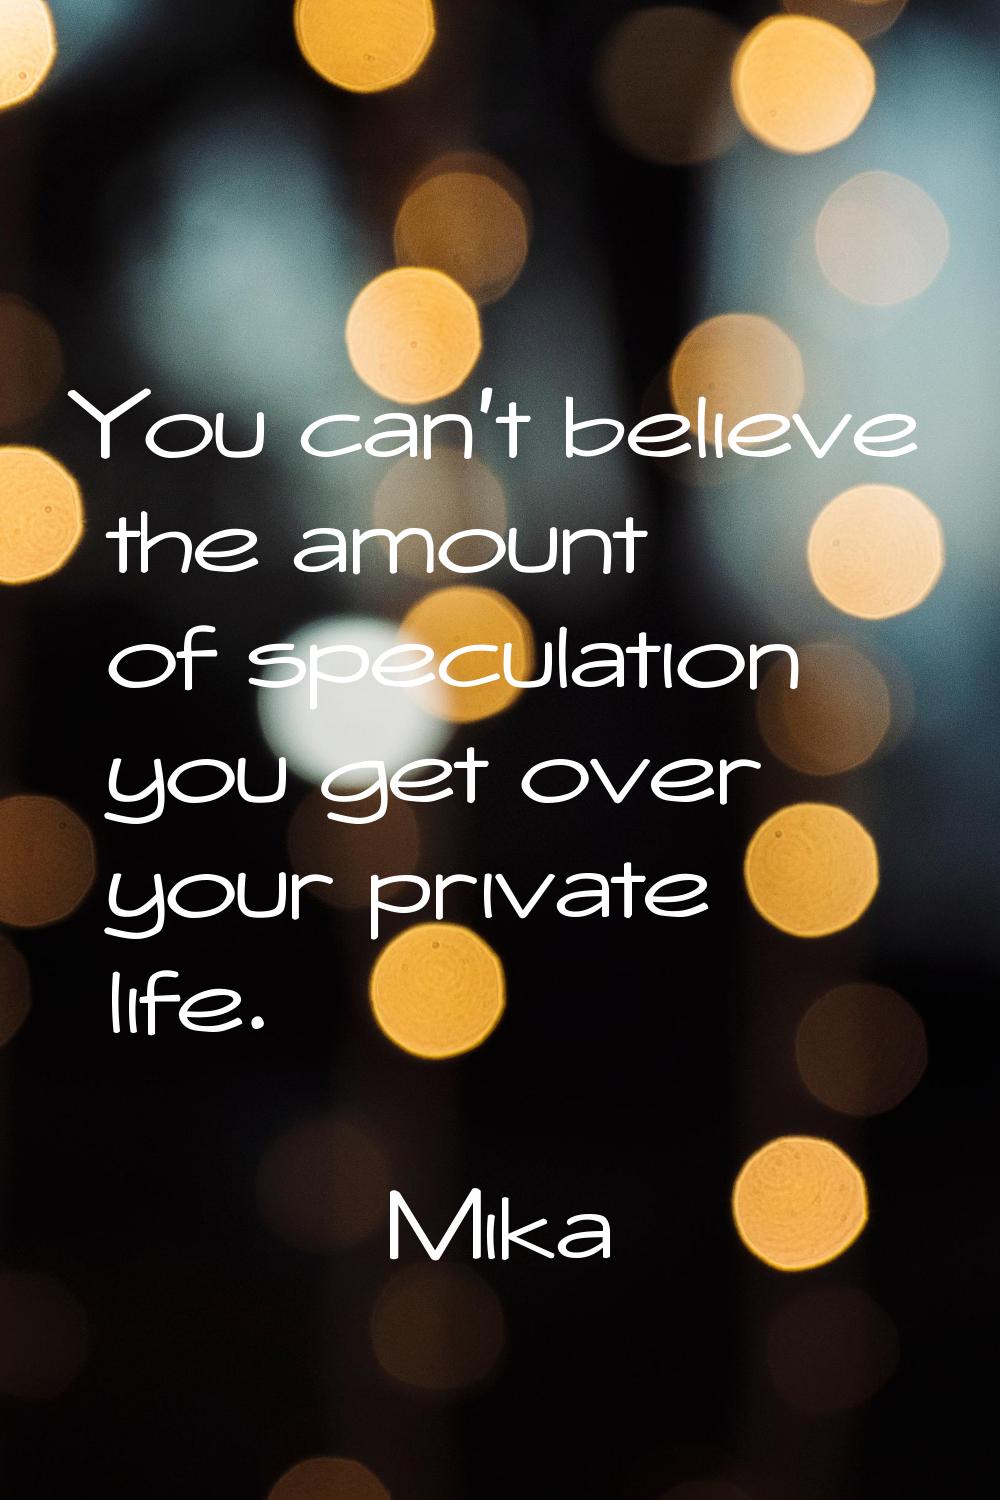 You can't believe the amount of speculation you get over your private life.